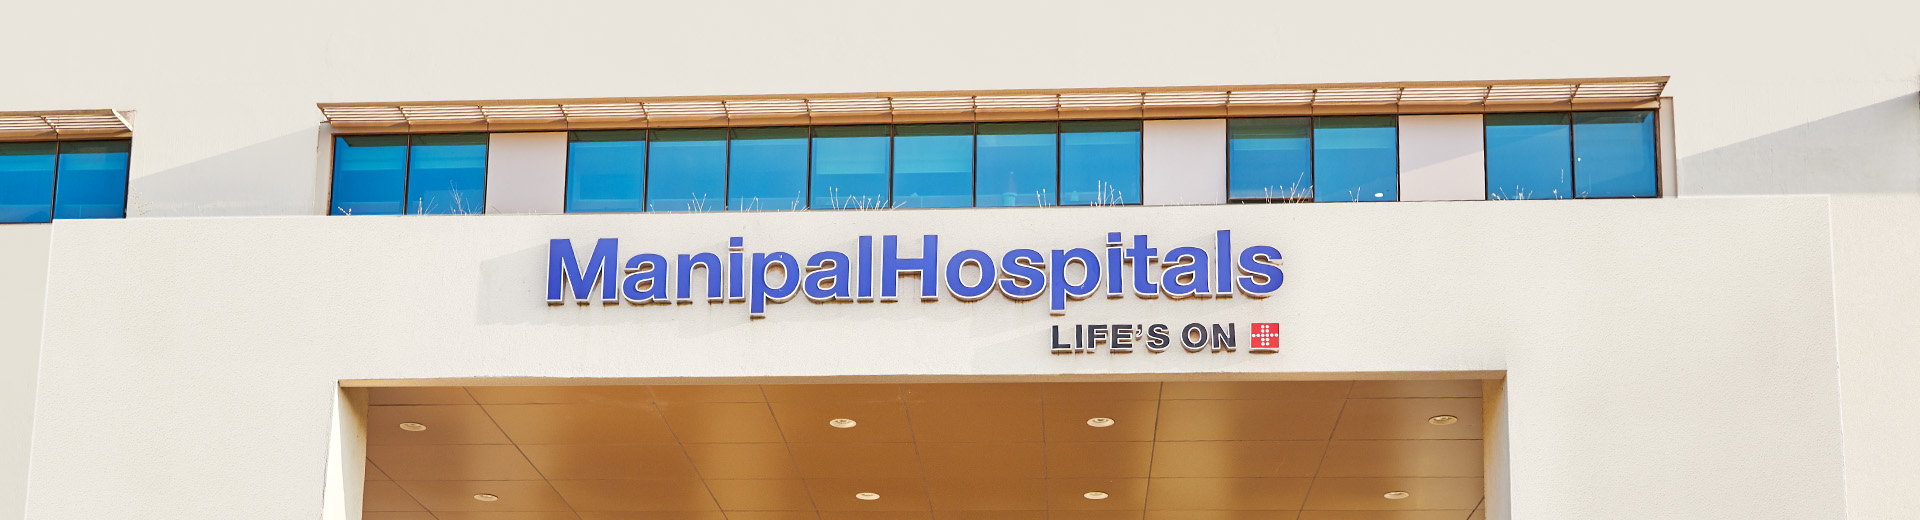 Privacy Policy | Manipal Hospitals Millers Road, Bangalore